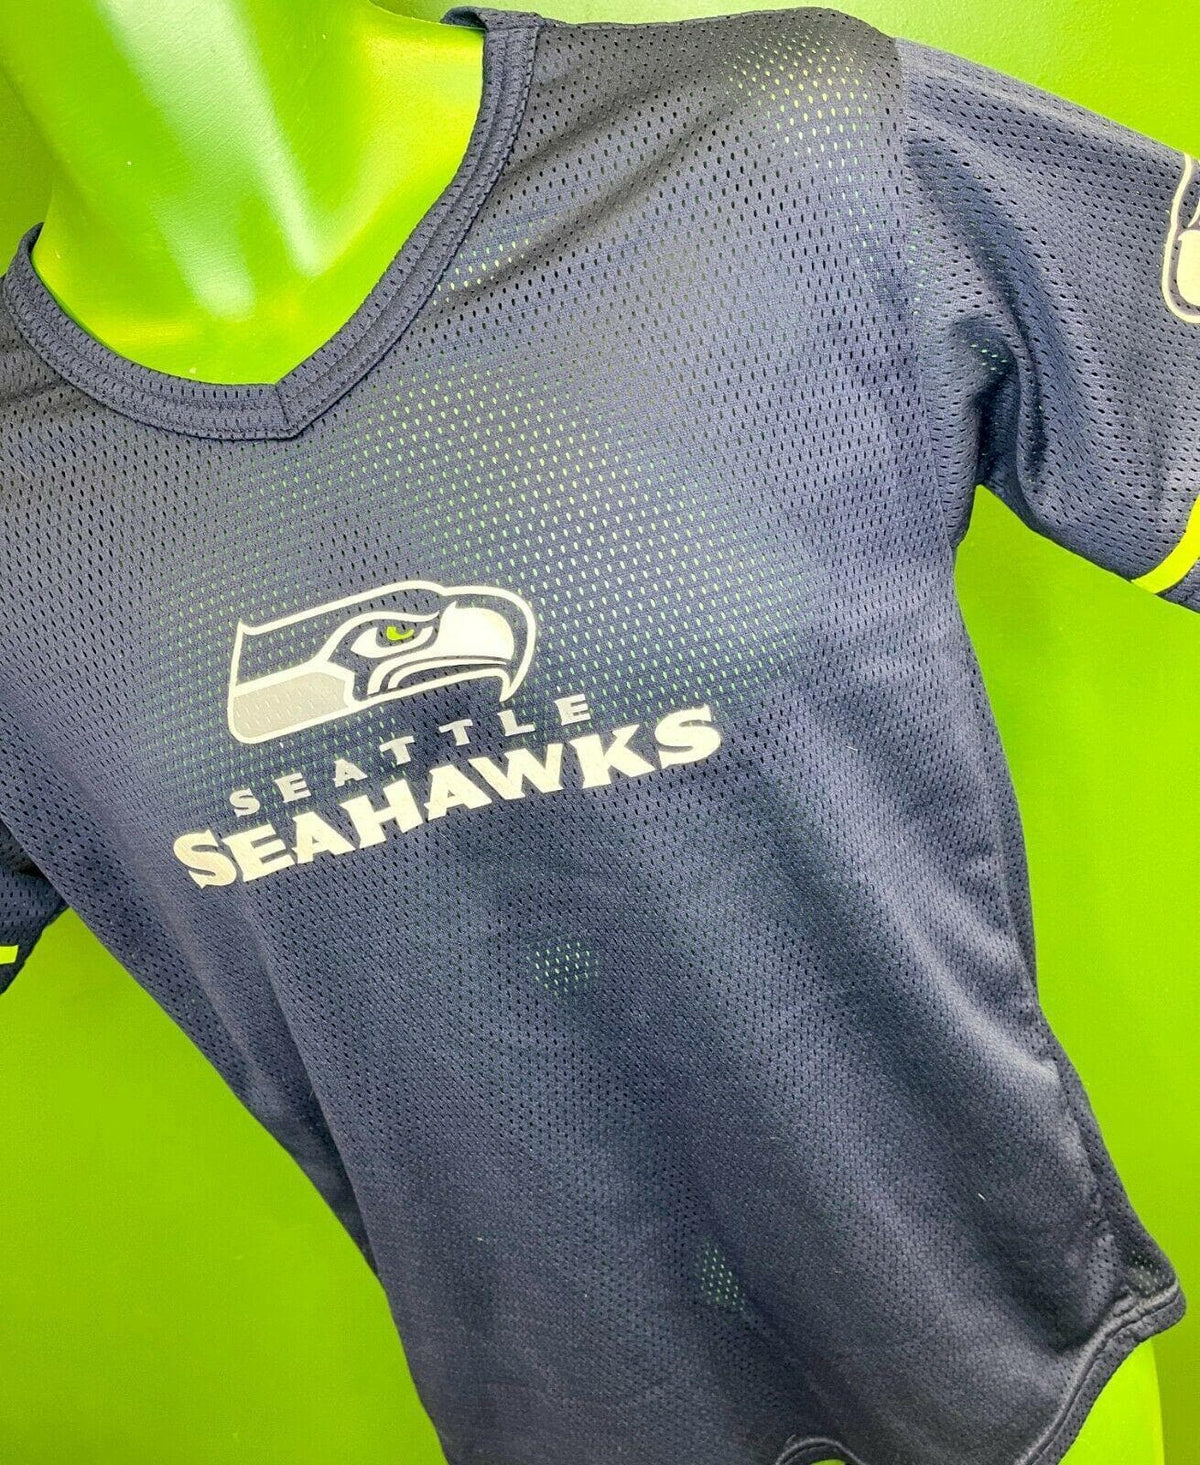 NFL Seattle Seahawks Franklin Mesh Jersey Youth Large 14-16